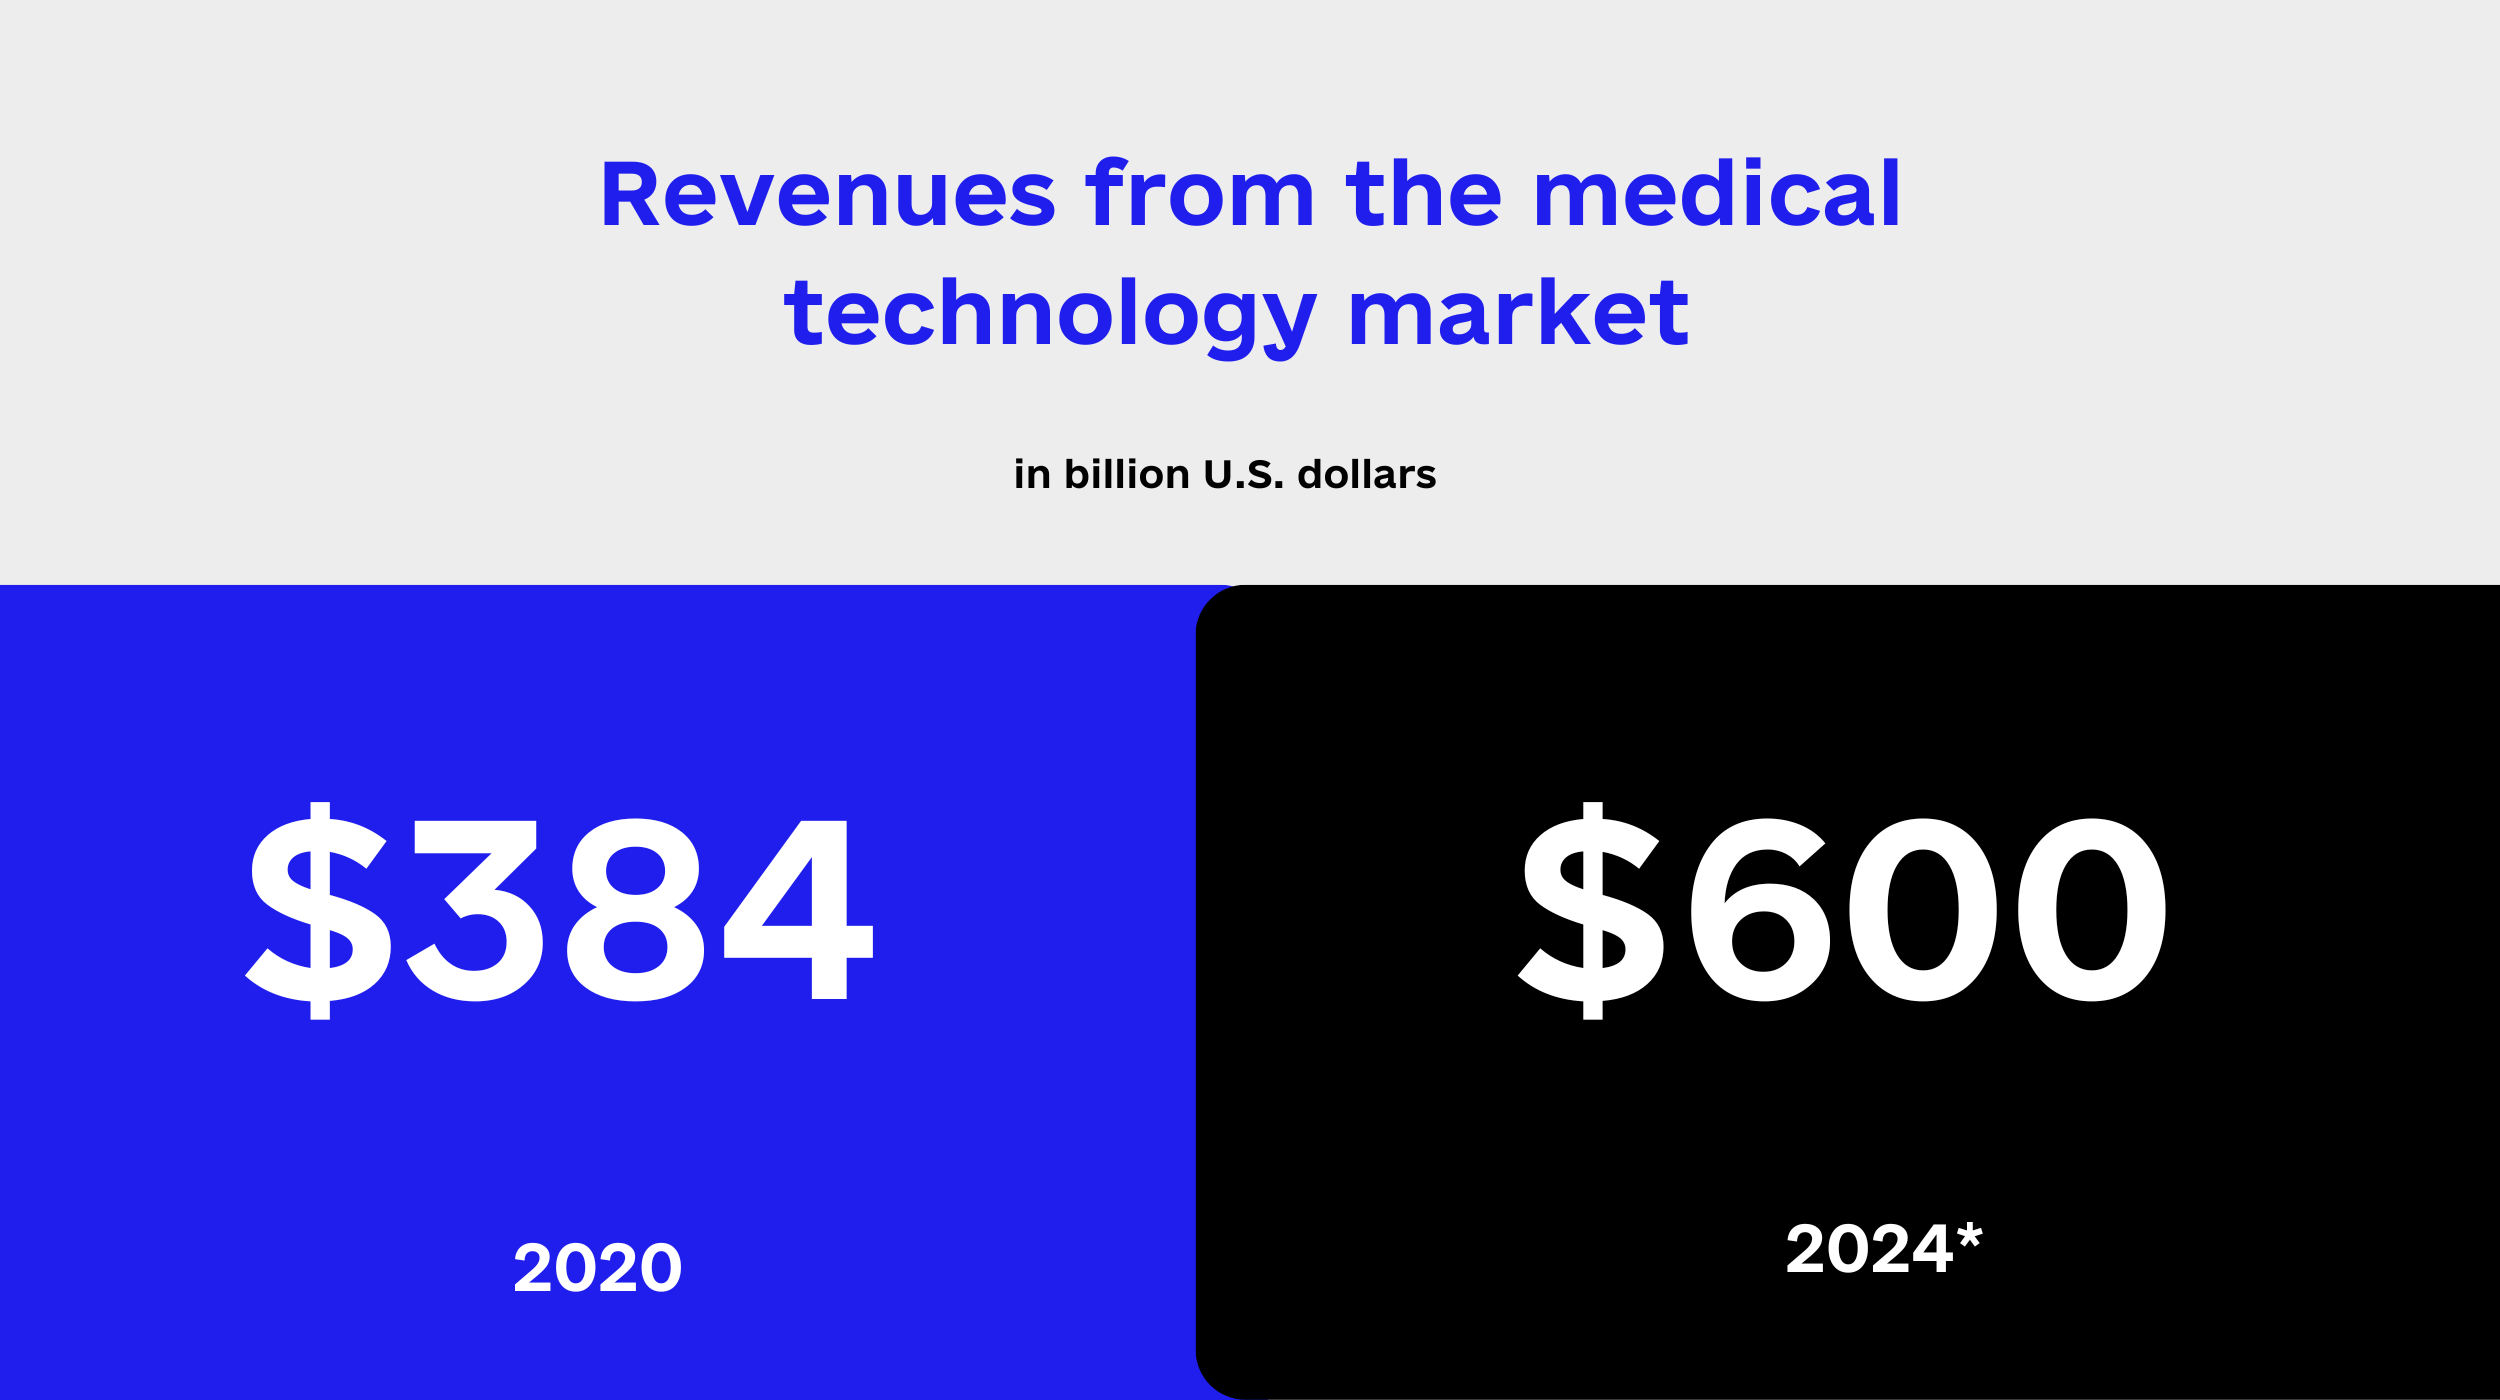 Revenues from the medical technology market 